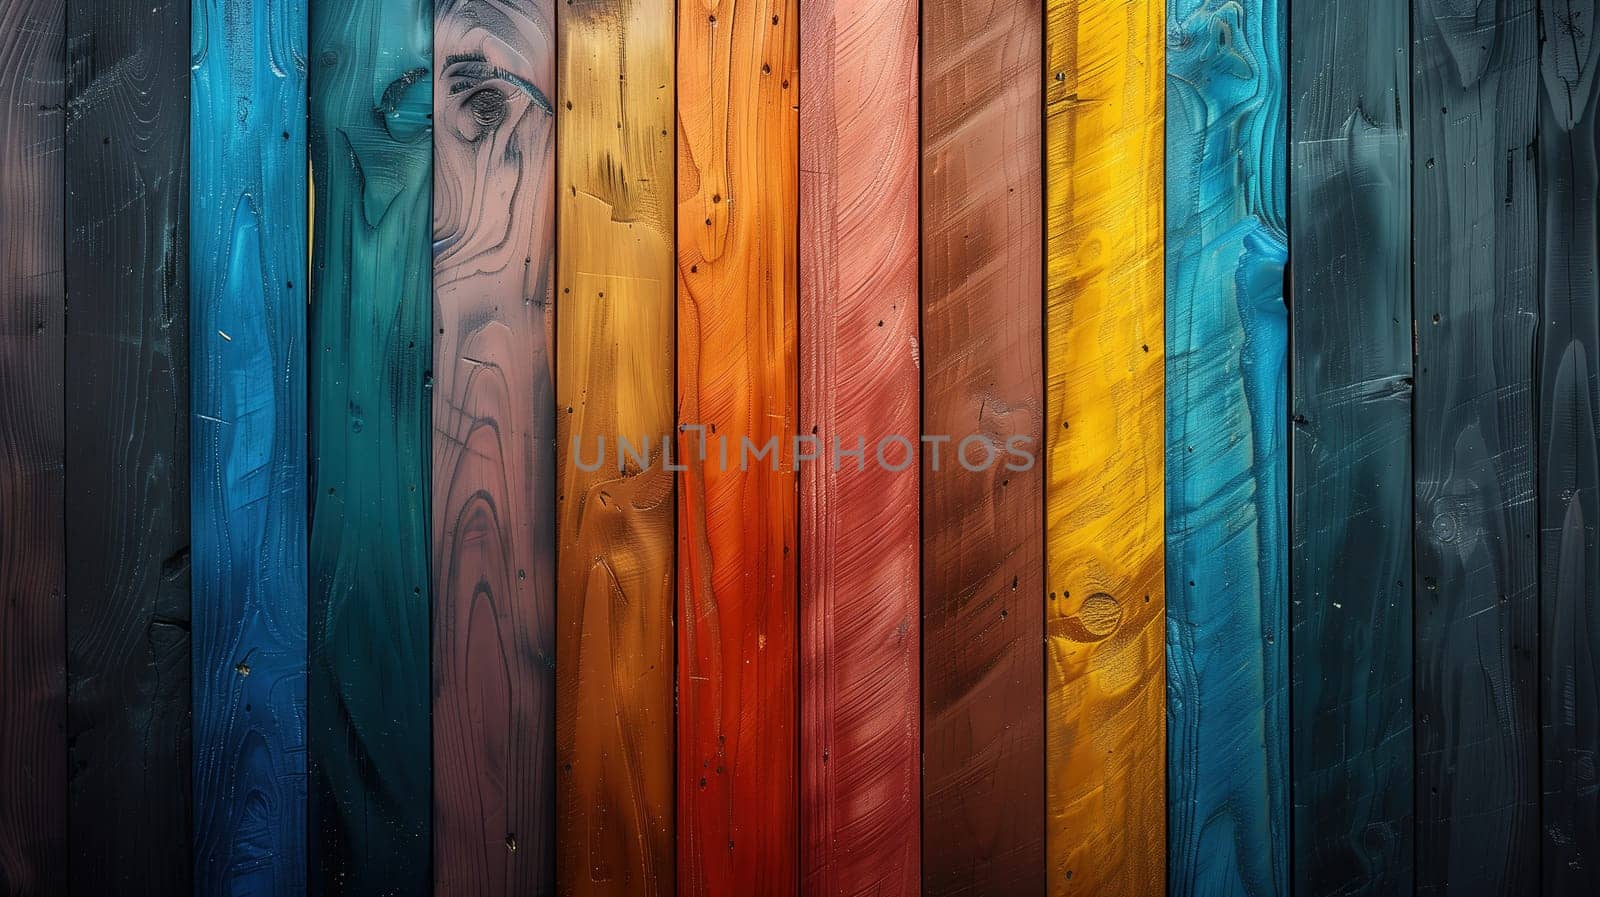 Vibrant Rainbow Colors Painted on Wooden Planks Symbolizing LGBT Pride by TRMK